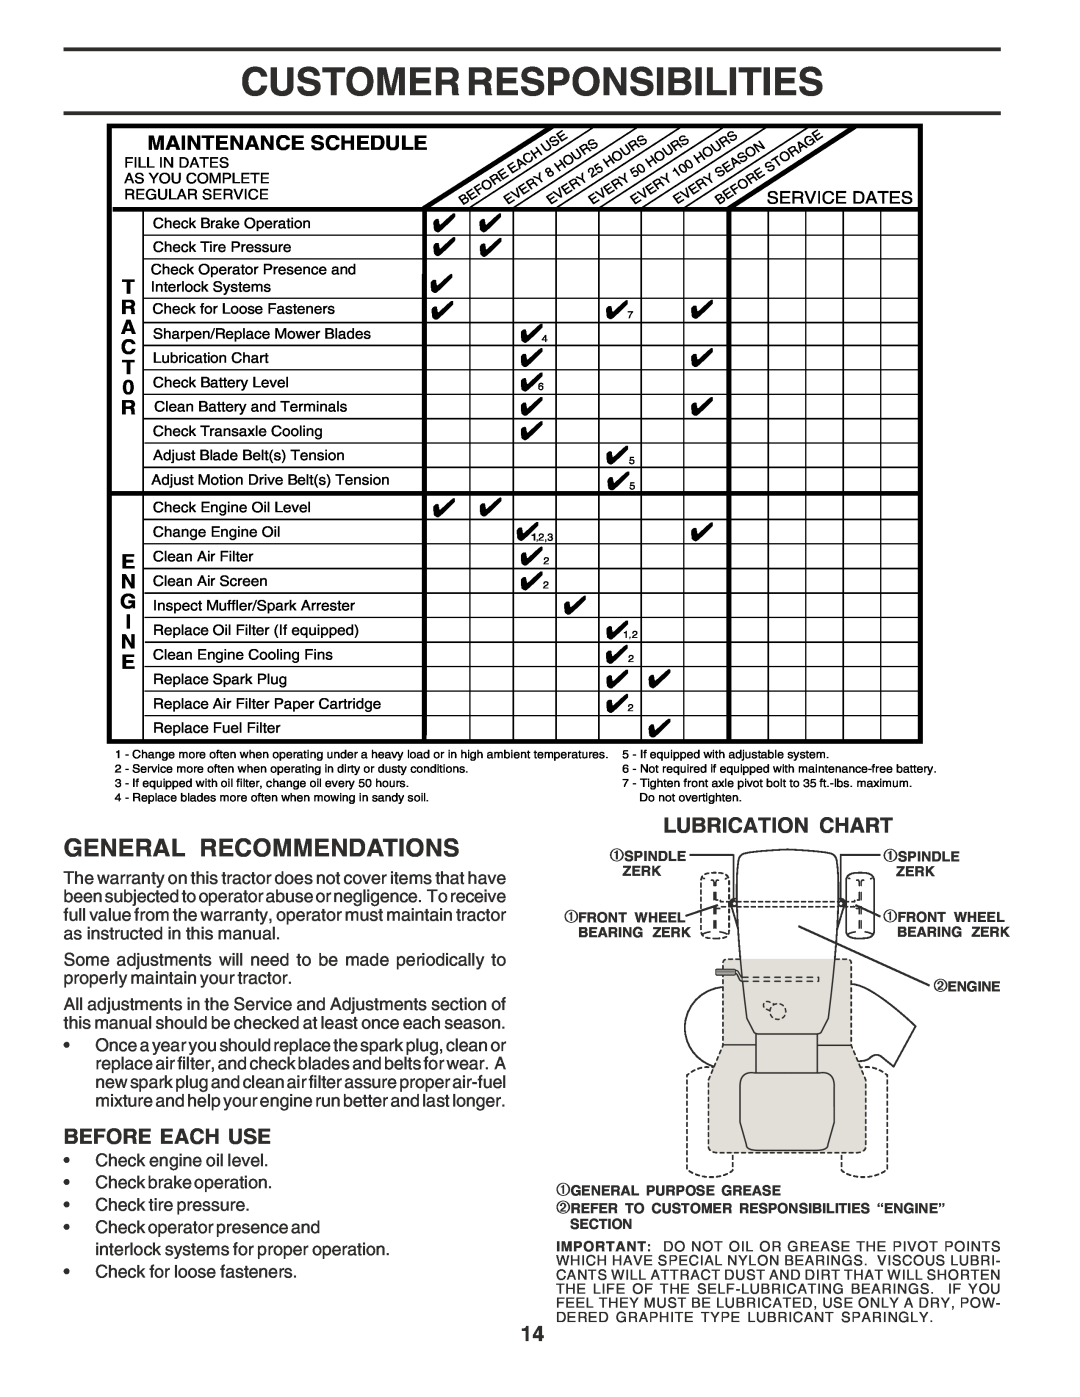 Poulan PO14542E manual Customer Responsibilities, General Recommendations, Before Each Use, Lubrication Chart 